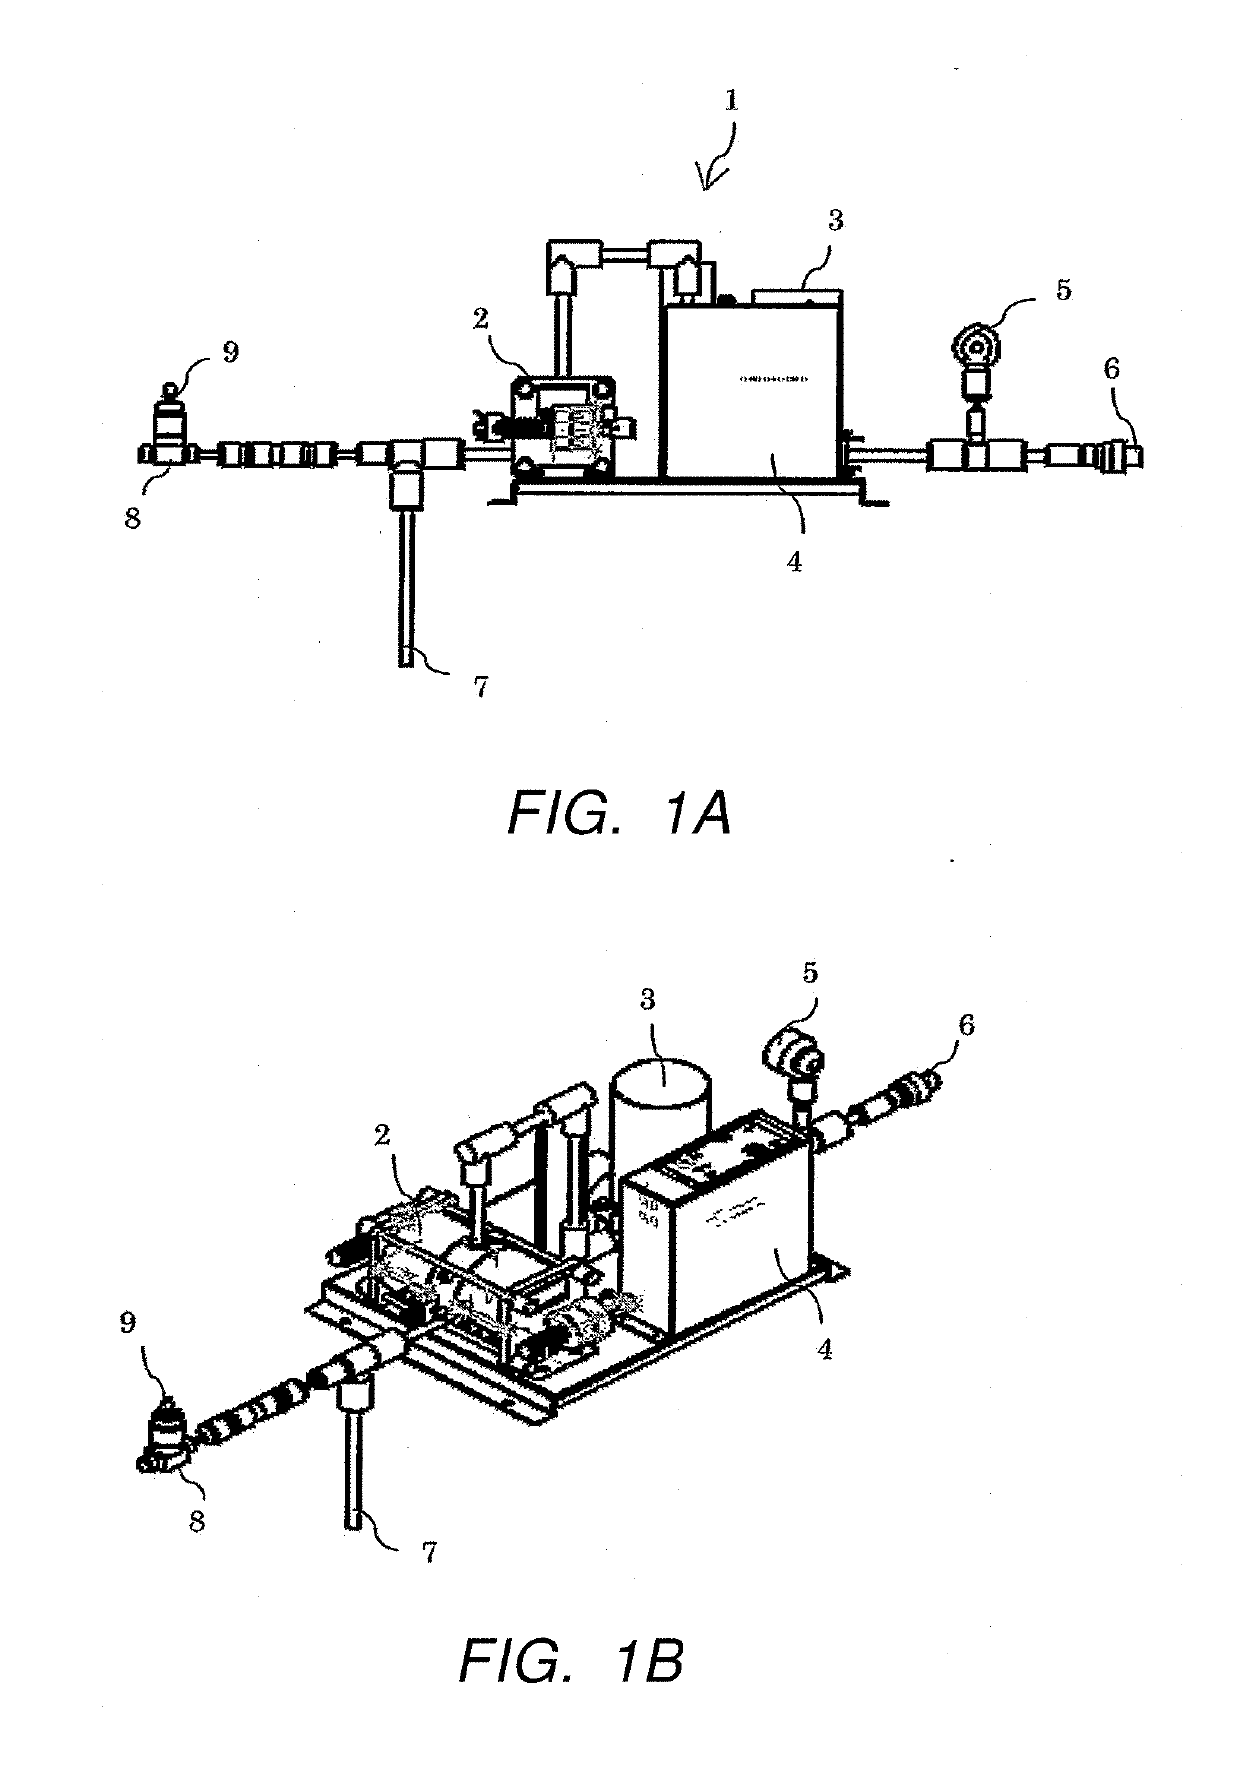 Administrable aqueous solution to living body and method for manufacturing same